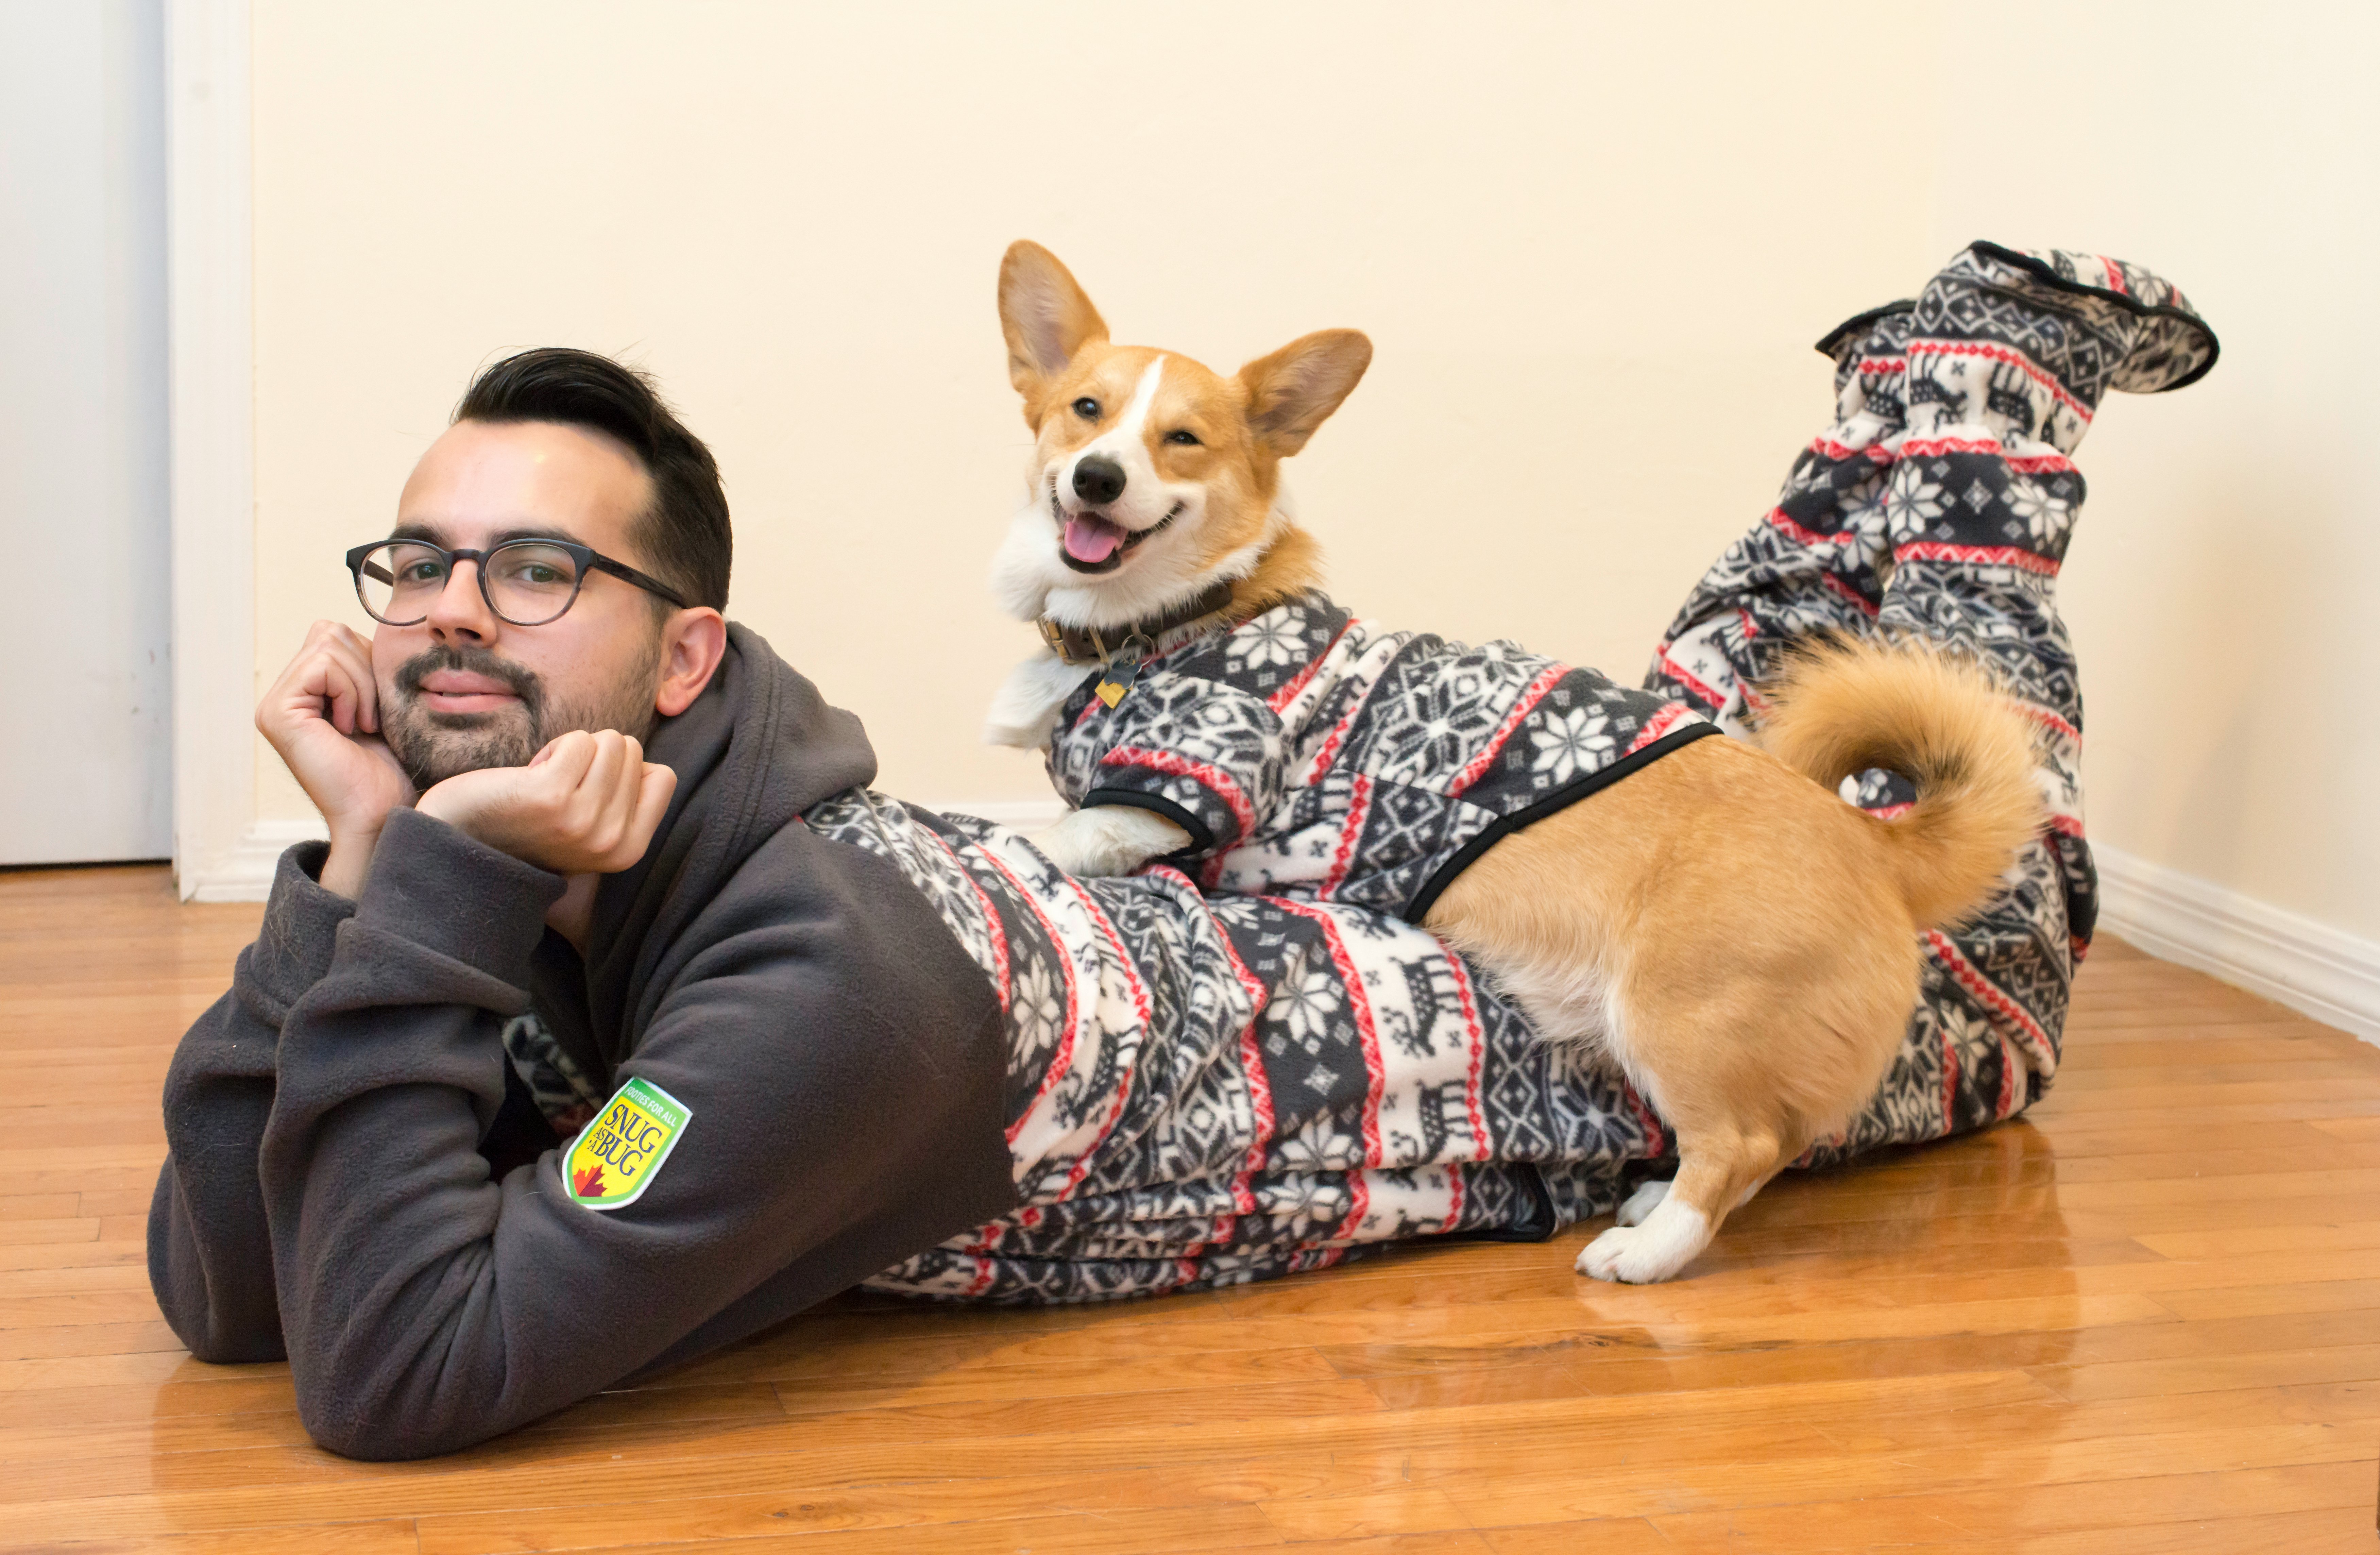 flannel pjs for dogs